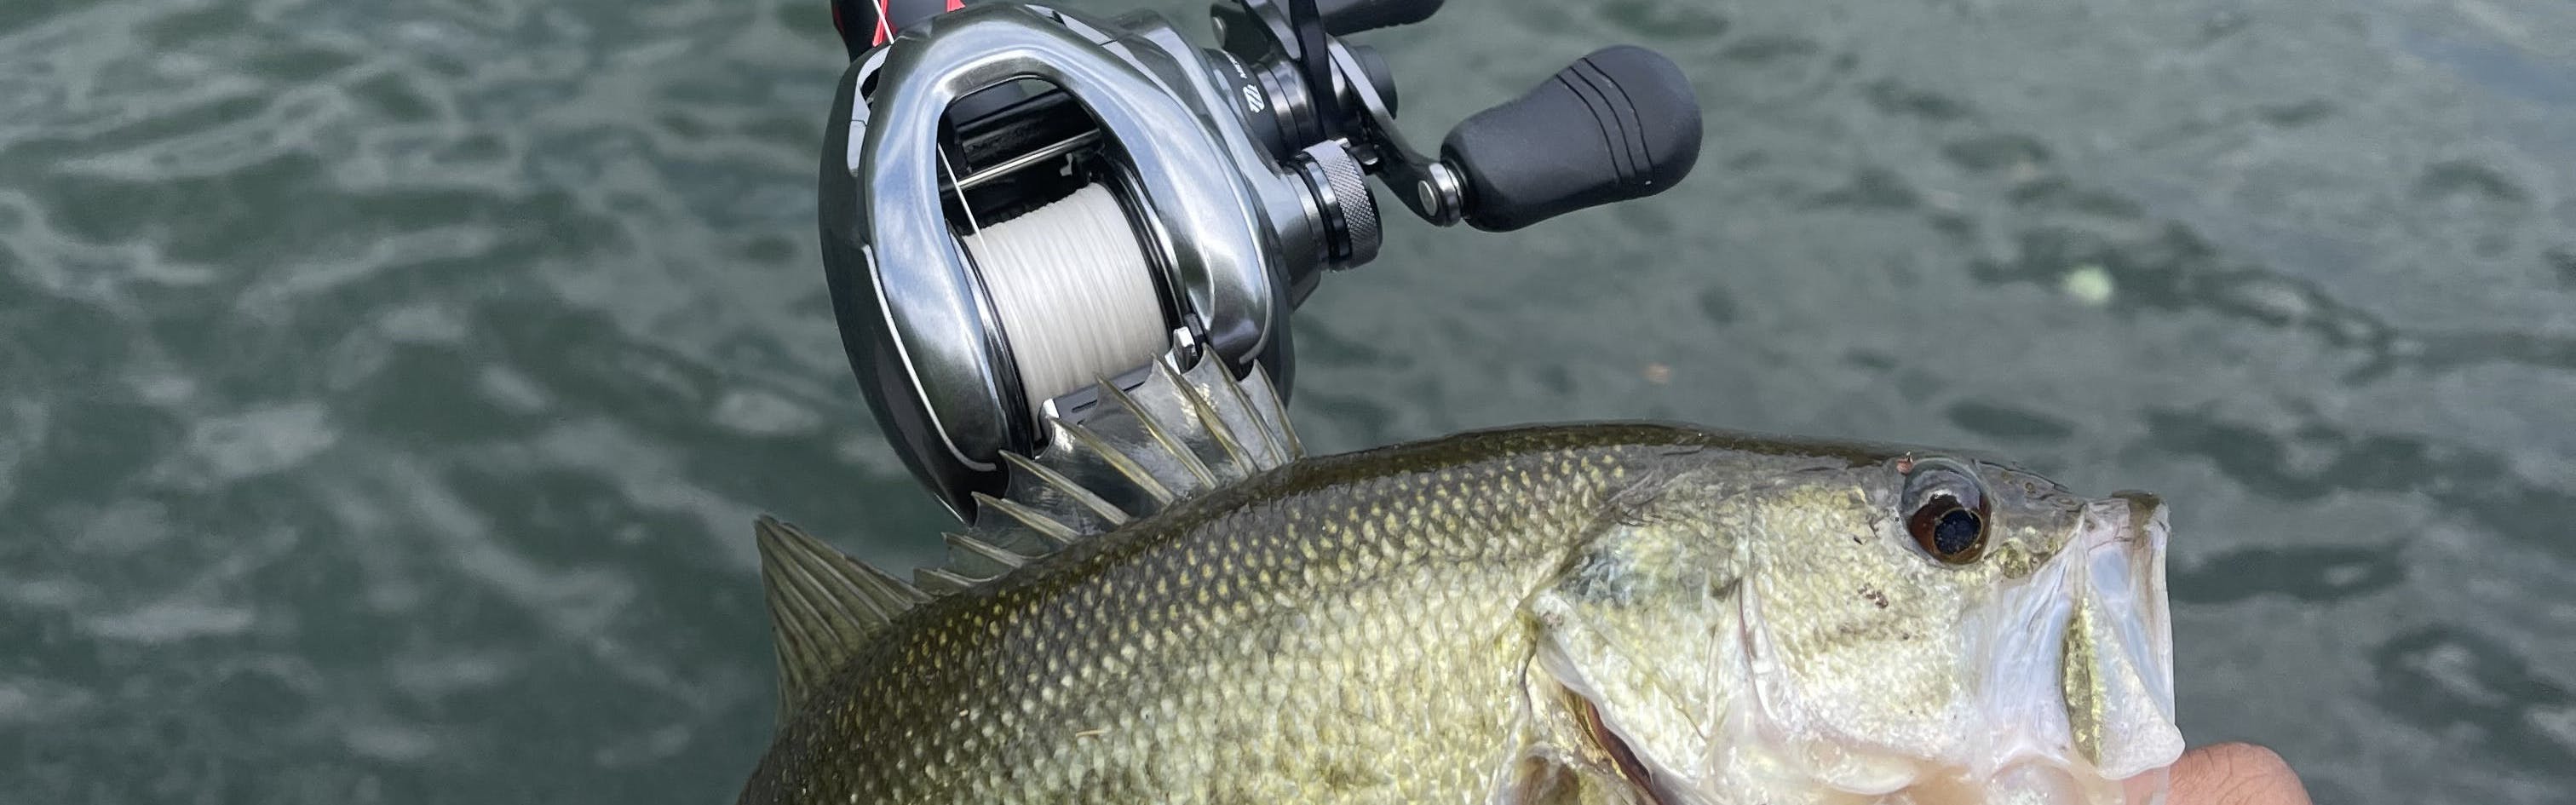 Fishing Reels 101: How to Choose the Best Spinning Reel for You